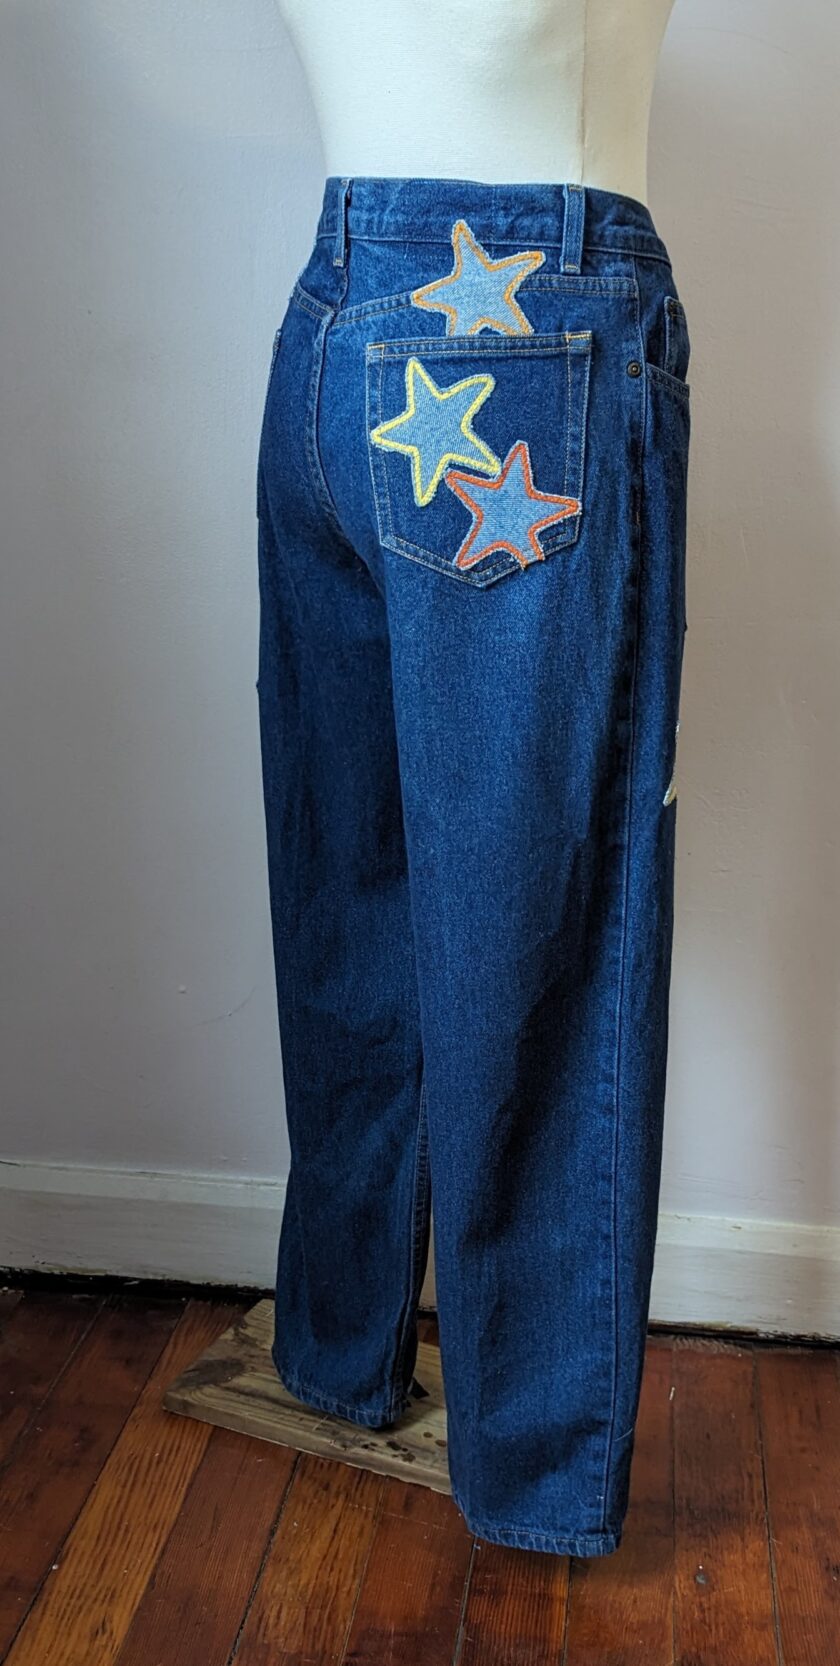 A mannequin wearing a pair of jeans with stars on them.